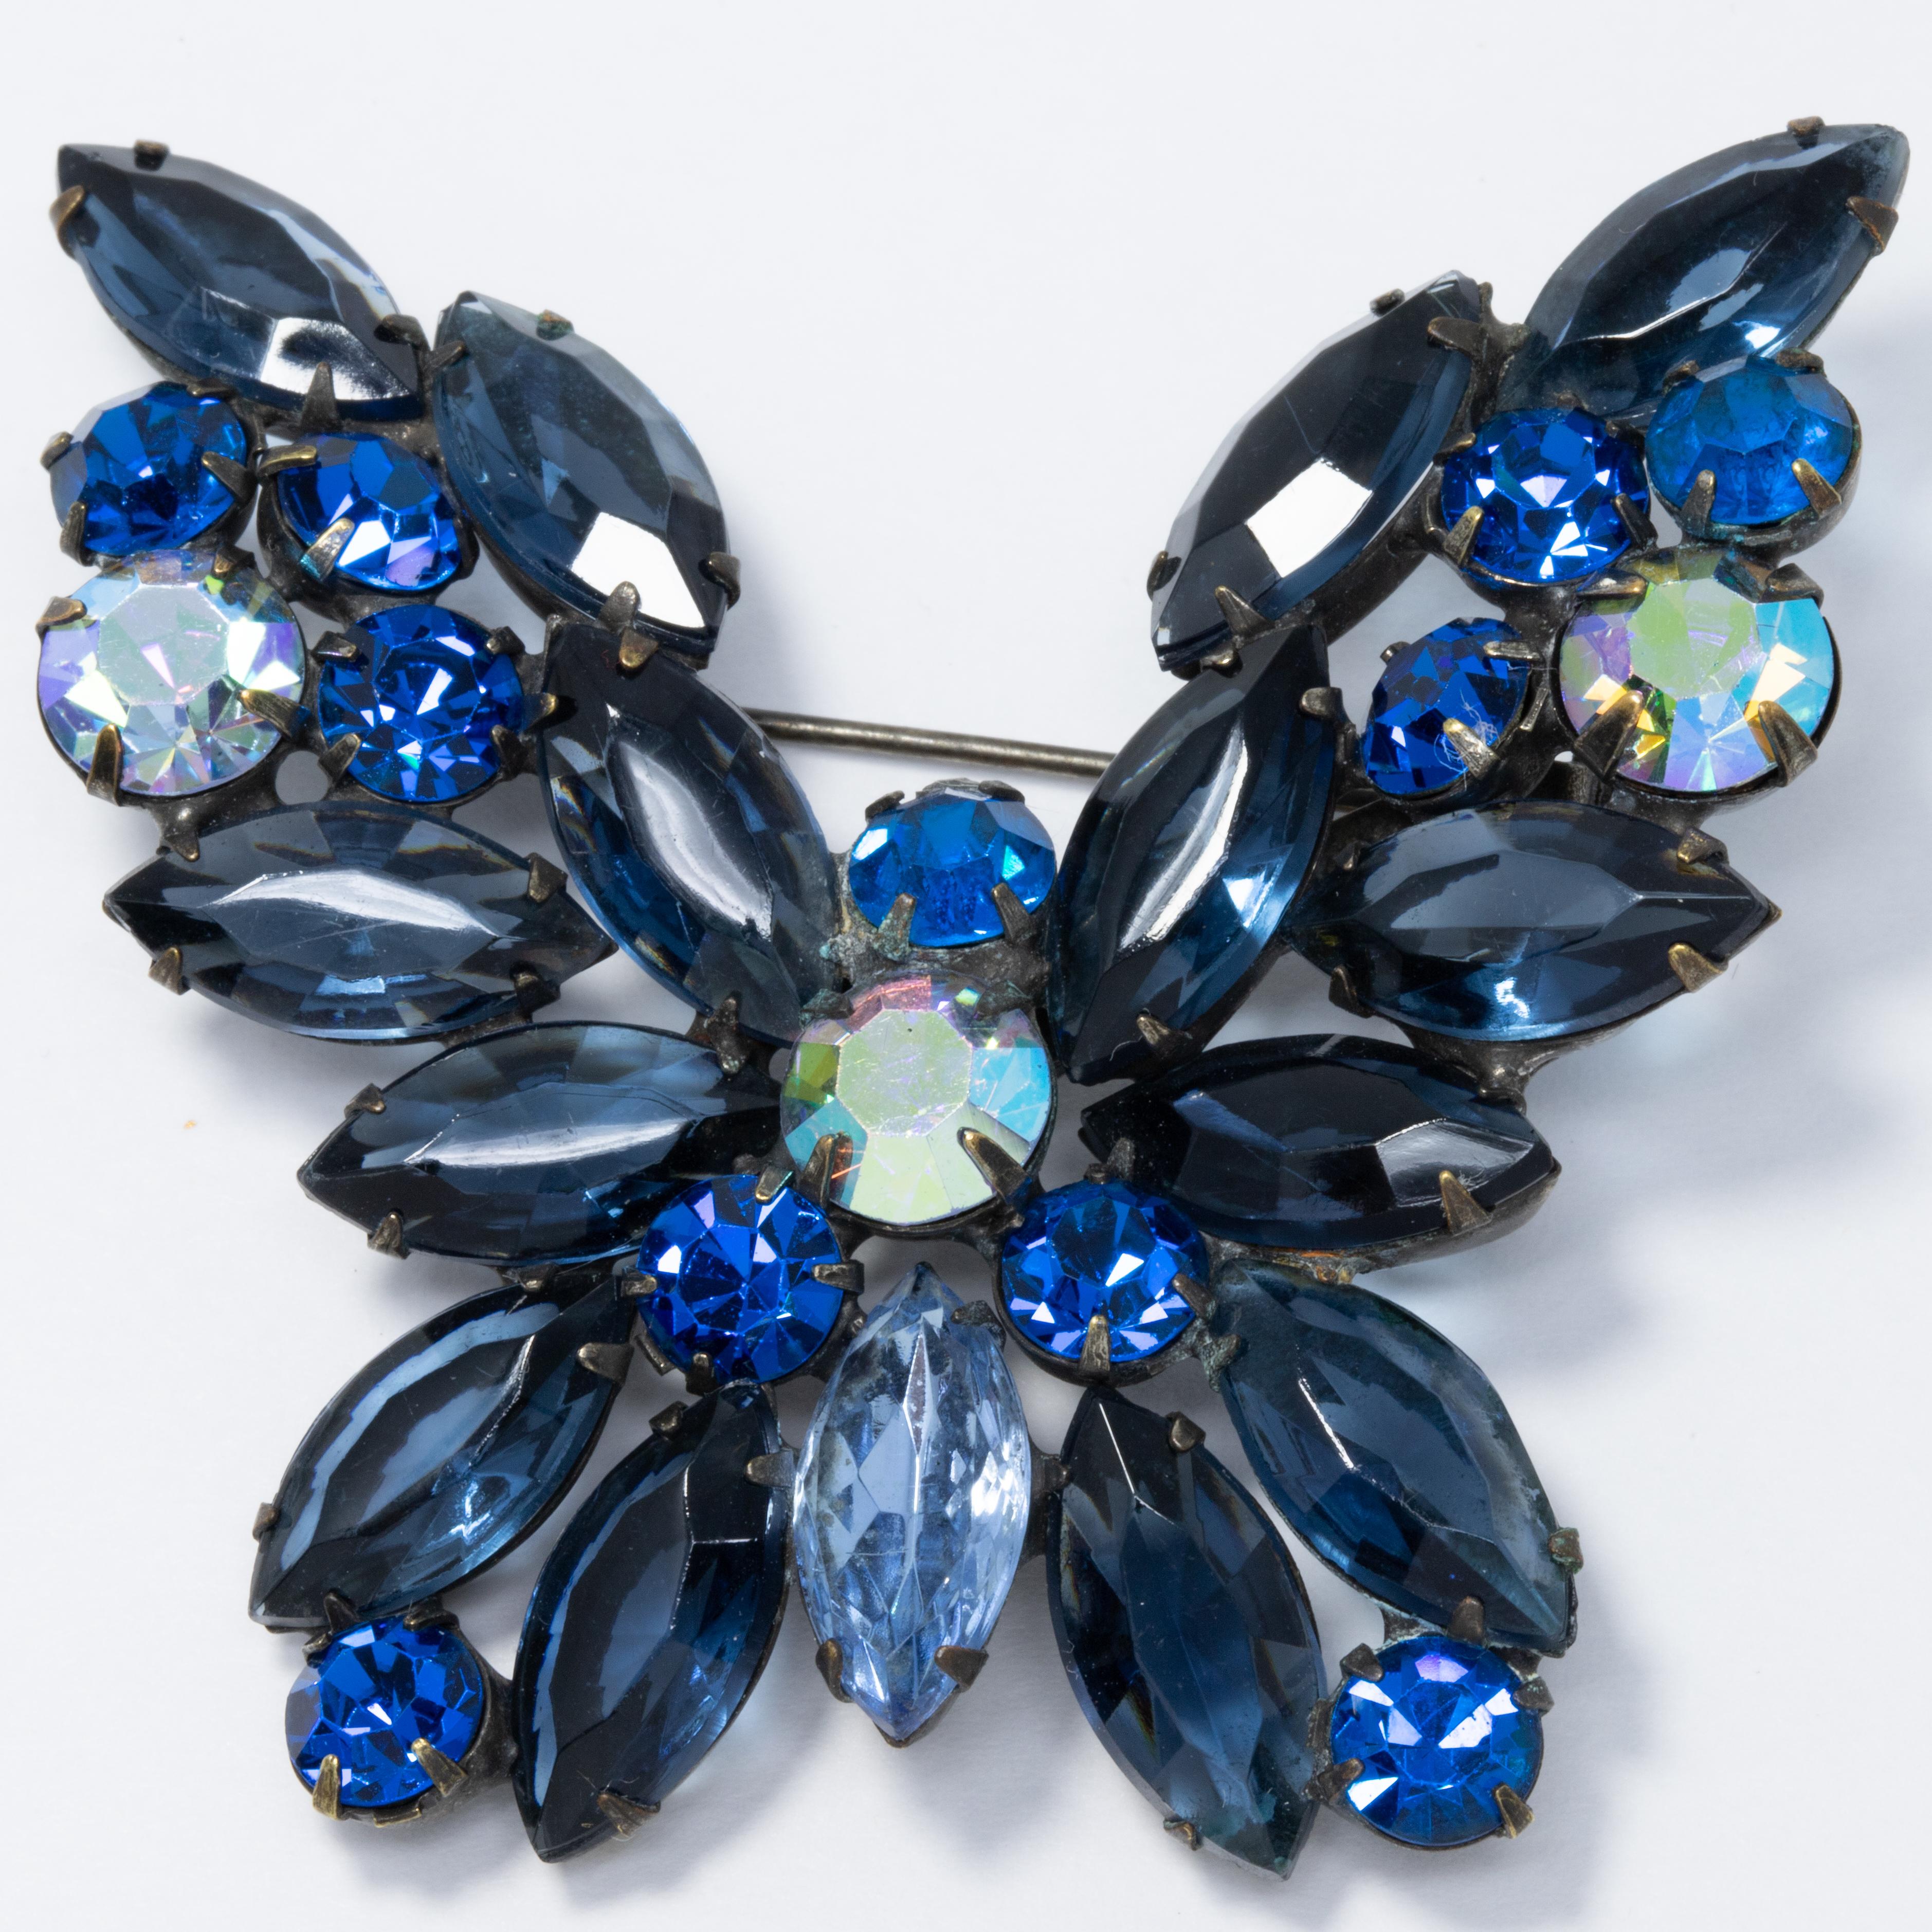 A sparkling butterfly pin brooch decorated with dazzling, prong set crystals. Features glittering sapphire, smoky blue, and aurora borealis colors colors on a gunmetal-tone setting.

Hallmarks: WEISS ©